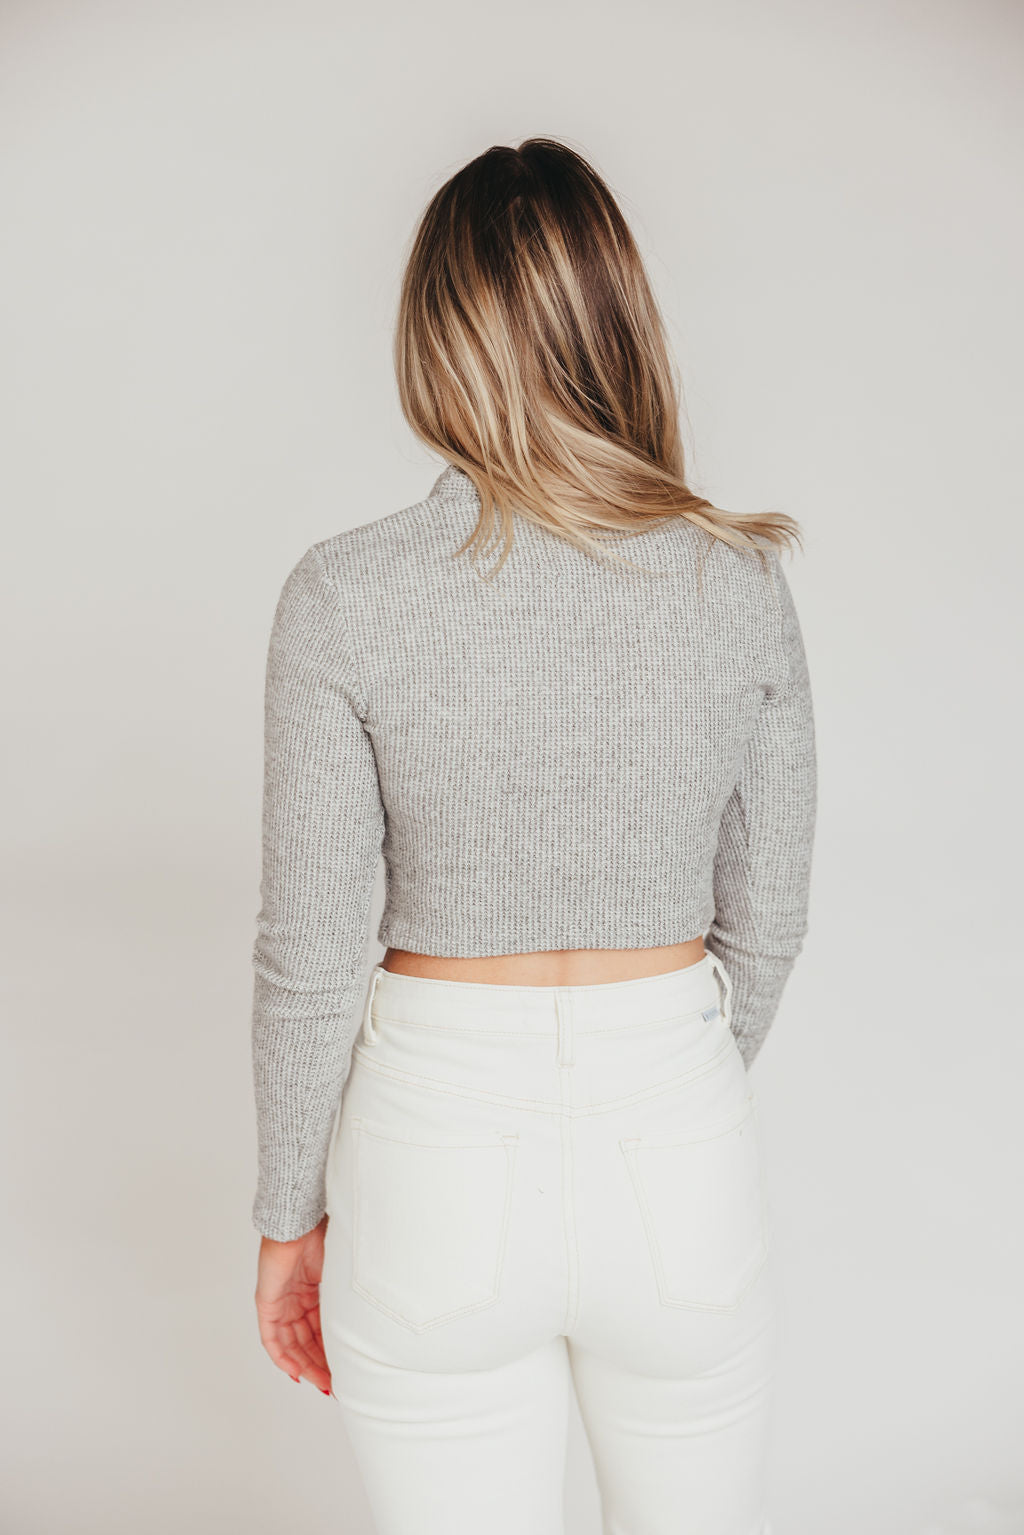 Sutton Collared Long Sleeve Top with Front Ties in Grey